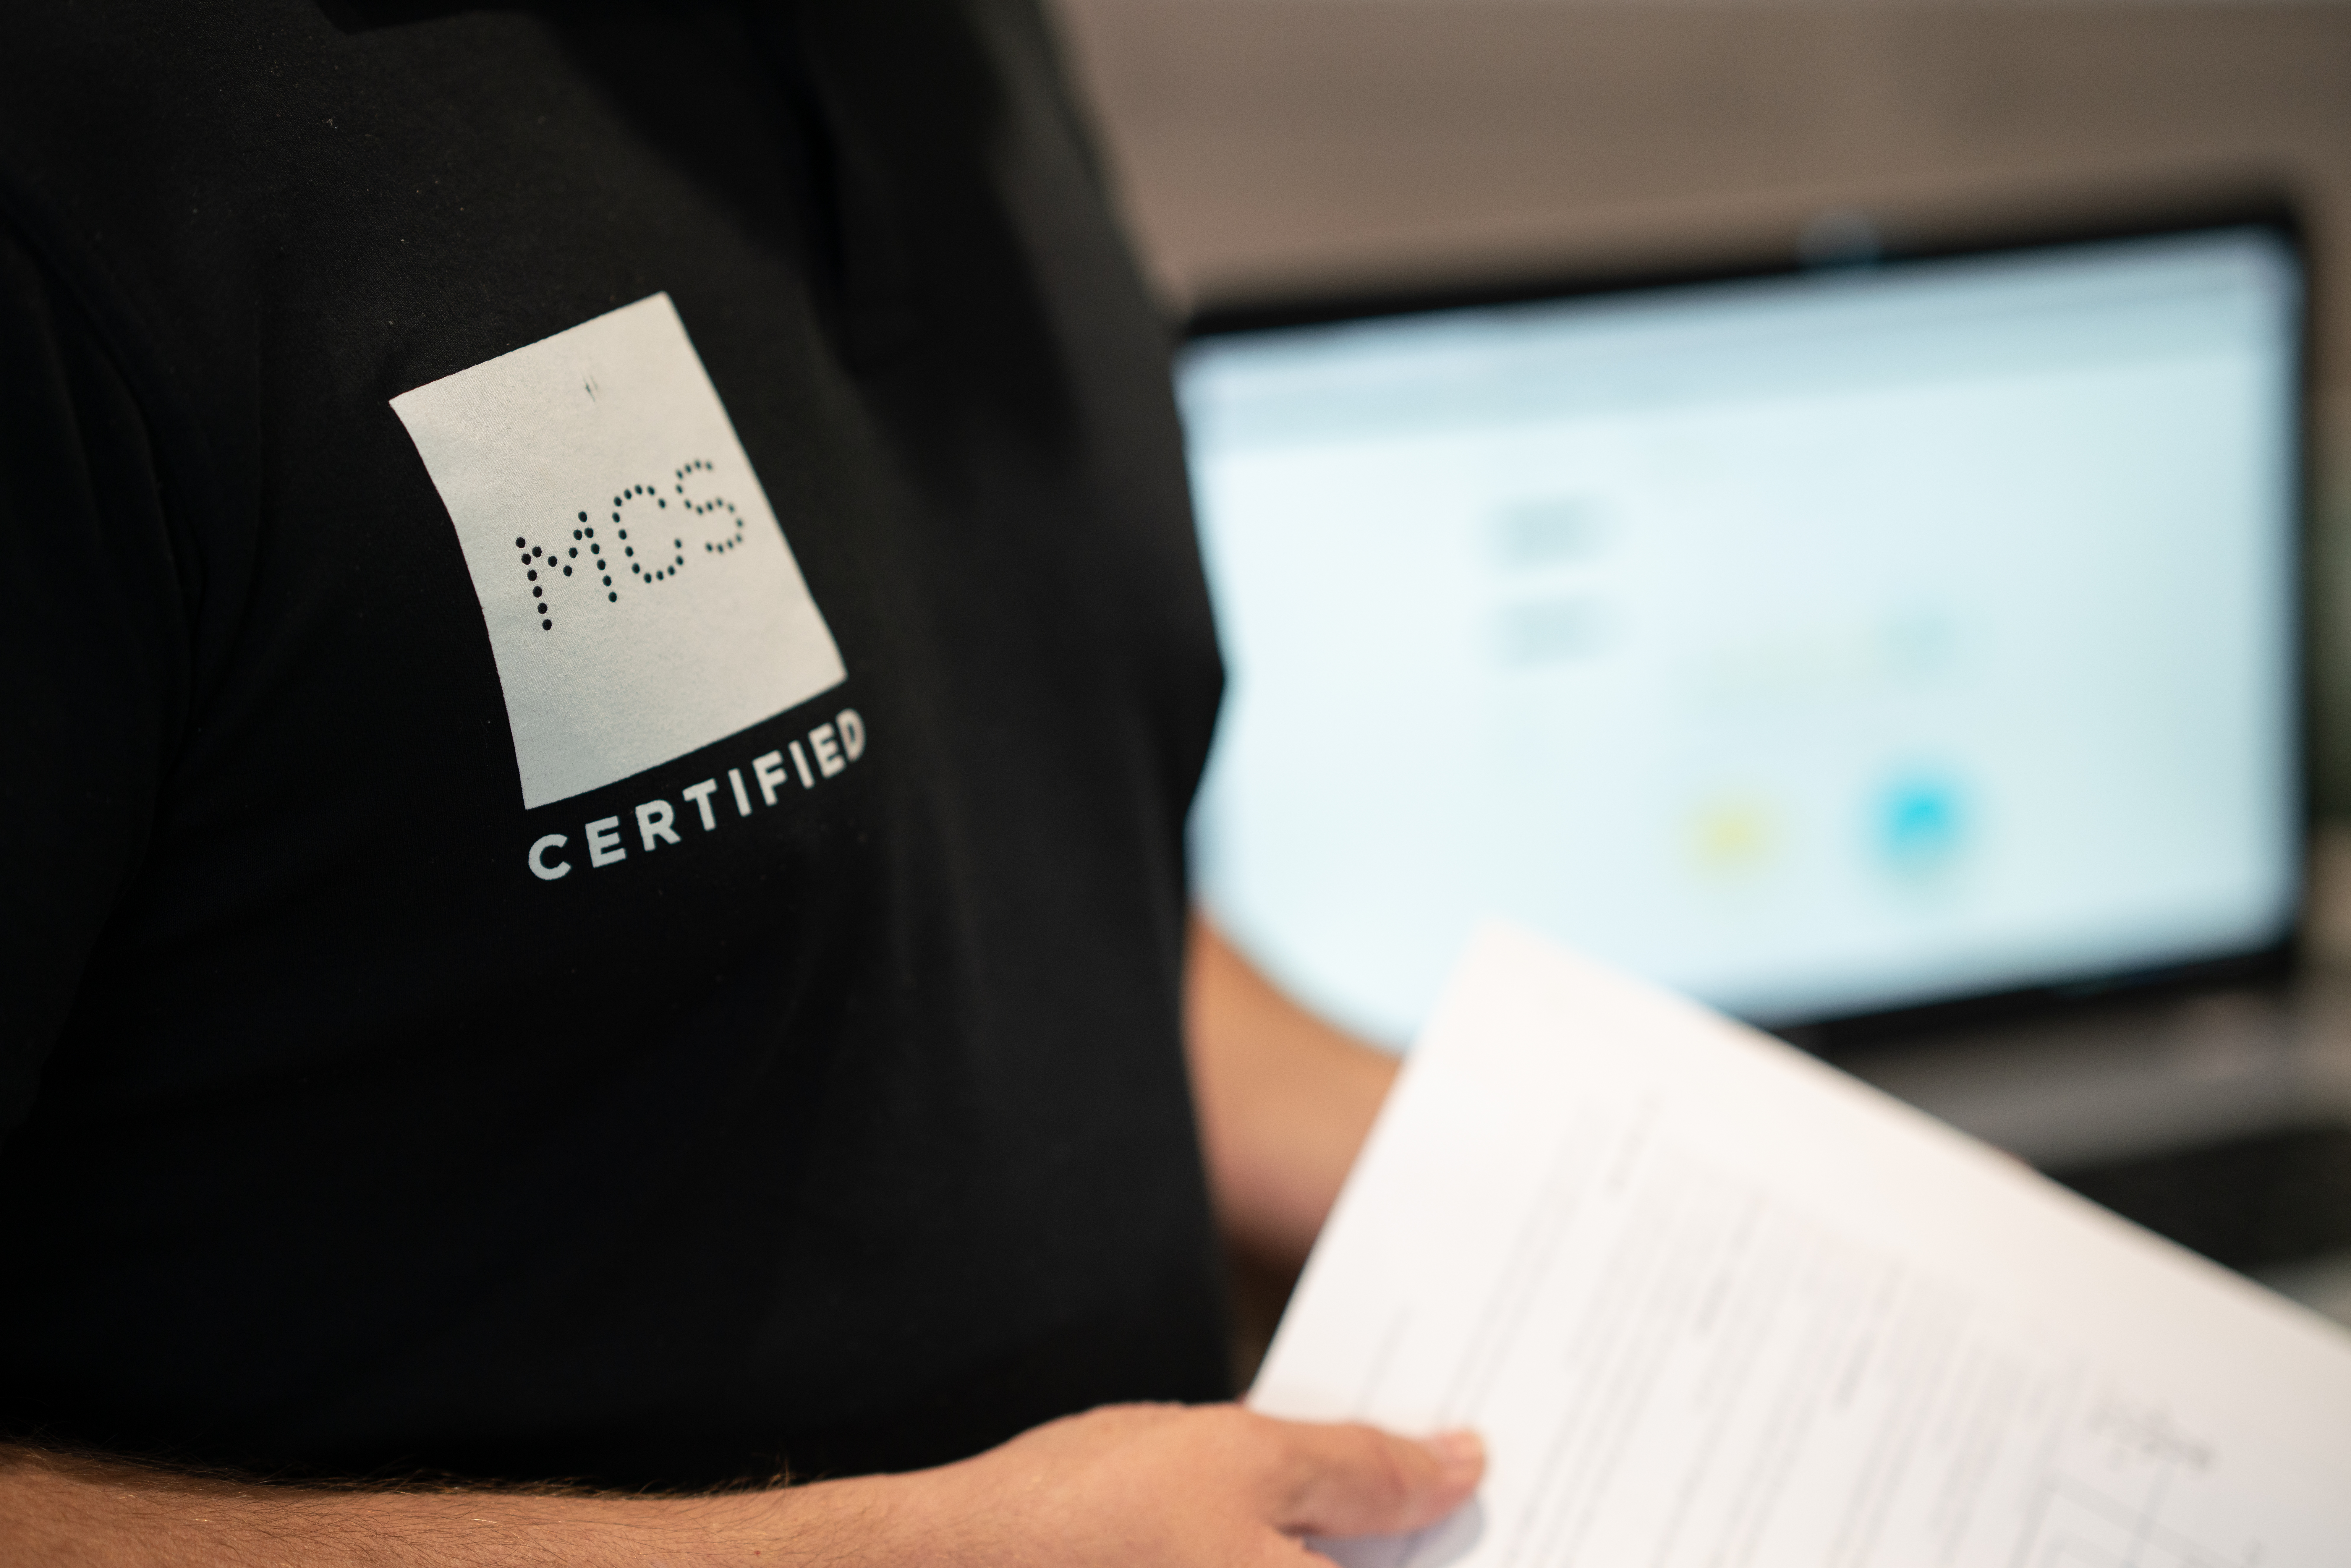 MCS certified polo shirt in front of laptop.